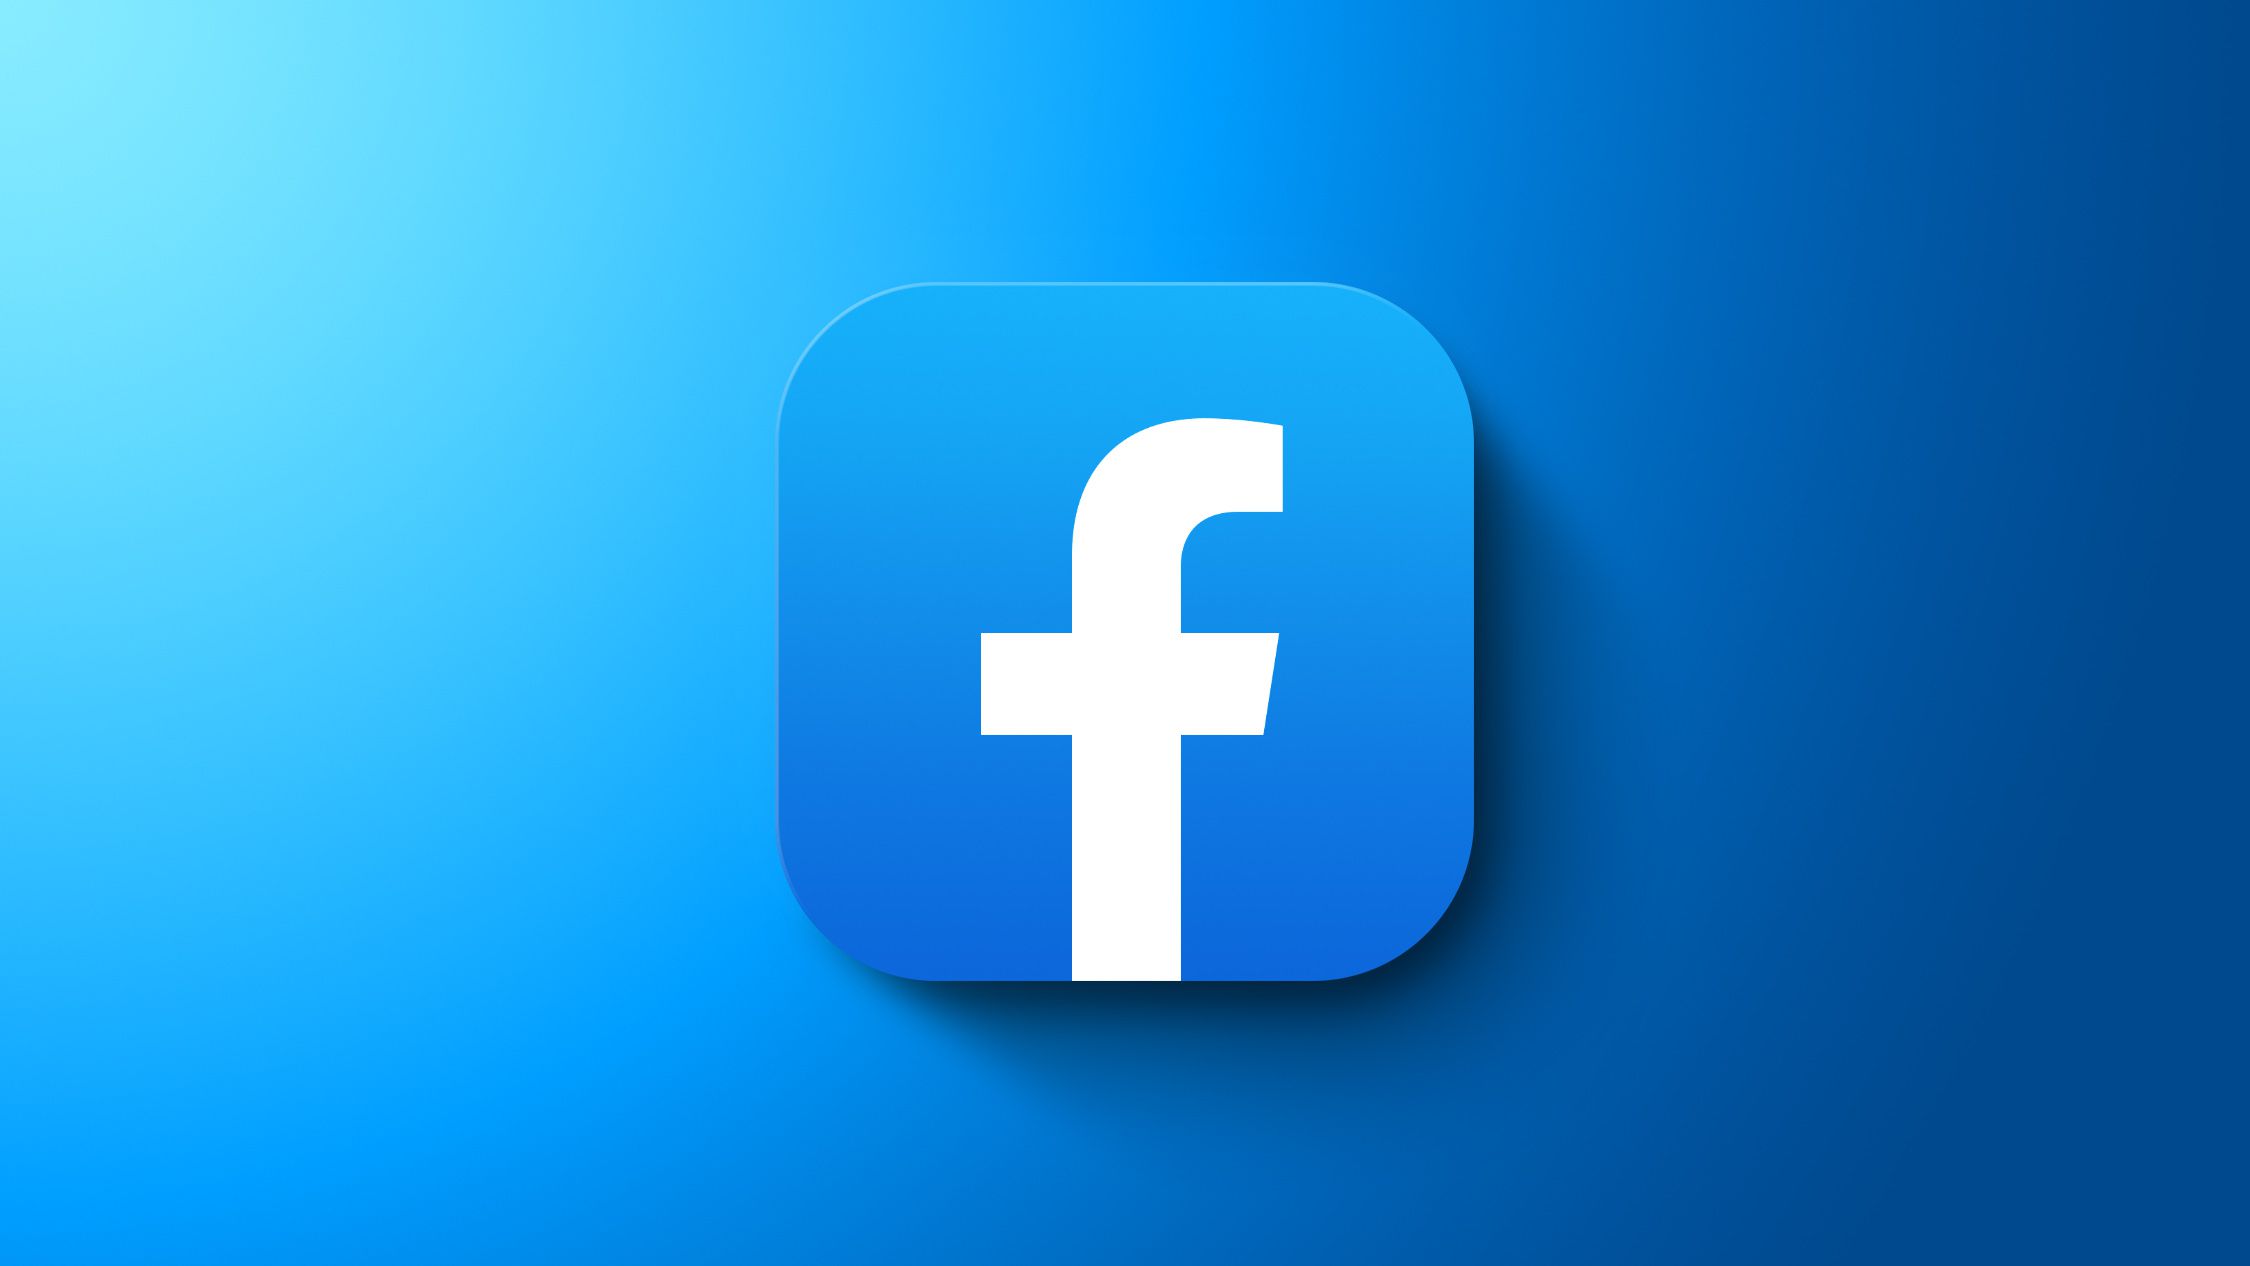 Facebook Accuses Apple of 'Undercutting Others' With App Store Guidelines on Boo..